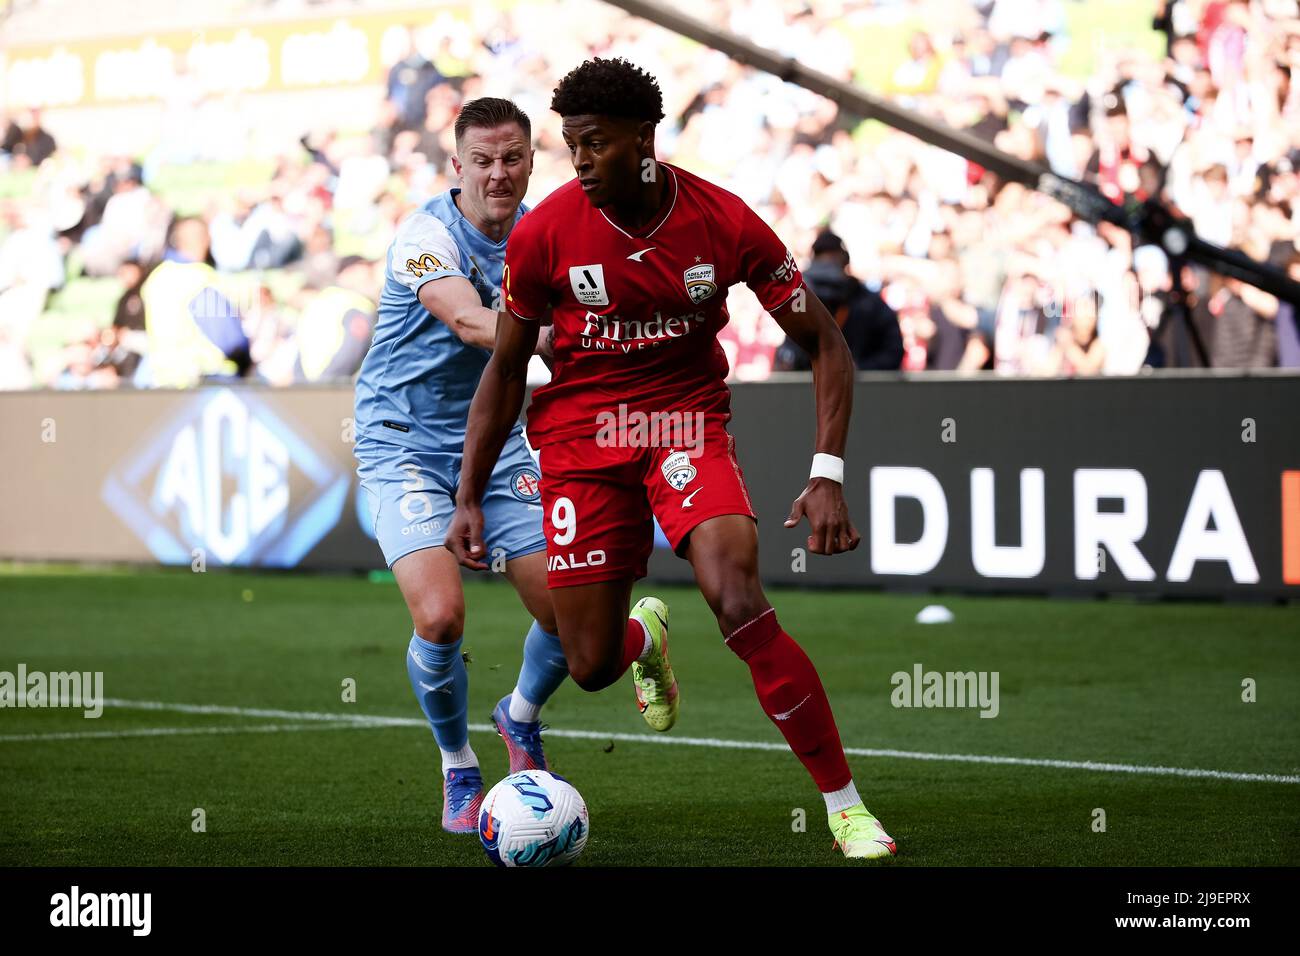 Melbourne, Australia, 22 May, 2022. Kusini Yengi of Adelaide United controls the ball ahead of Scott Jamieson of Melbourne City FC during the A-League Semi Final soccer match between Melbourne City FC and Adelaide United at AAMI Park on May 22, 2022 in Melbourne, Australia.during the A-League Semi Final soccer match between Melbourne City FC and Adelaide United at AAMI Park on May 22, 2022 in Melbourne, Australia. Credit: Dave Hewison/Speed Media/Alamy Live News Stock Photo